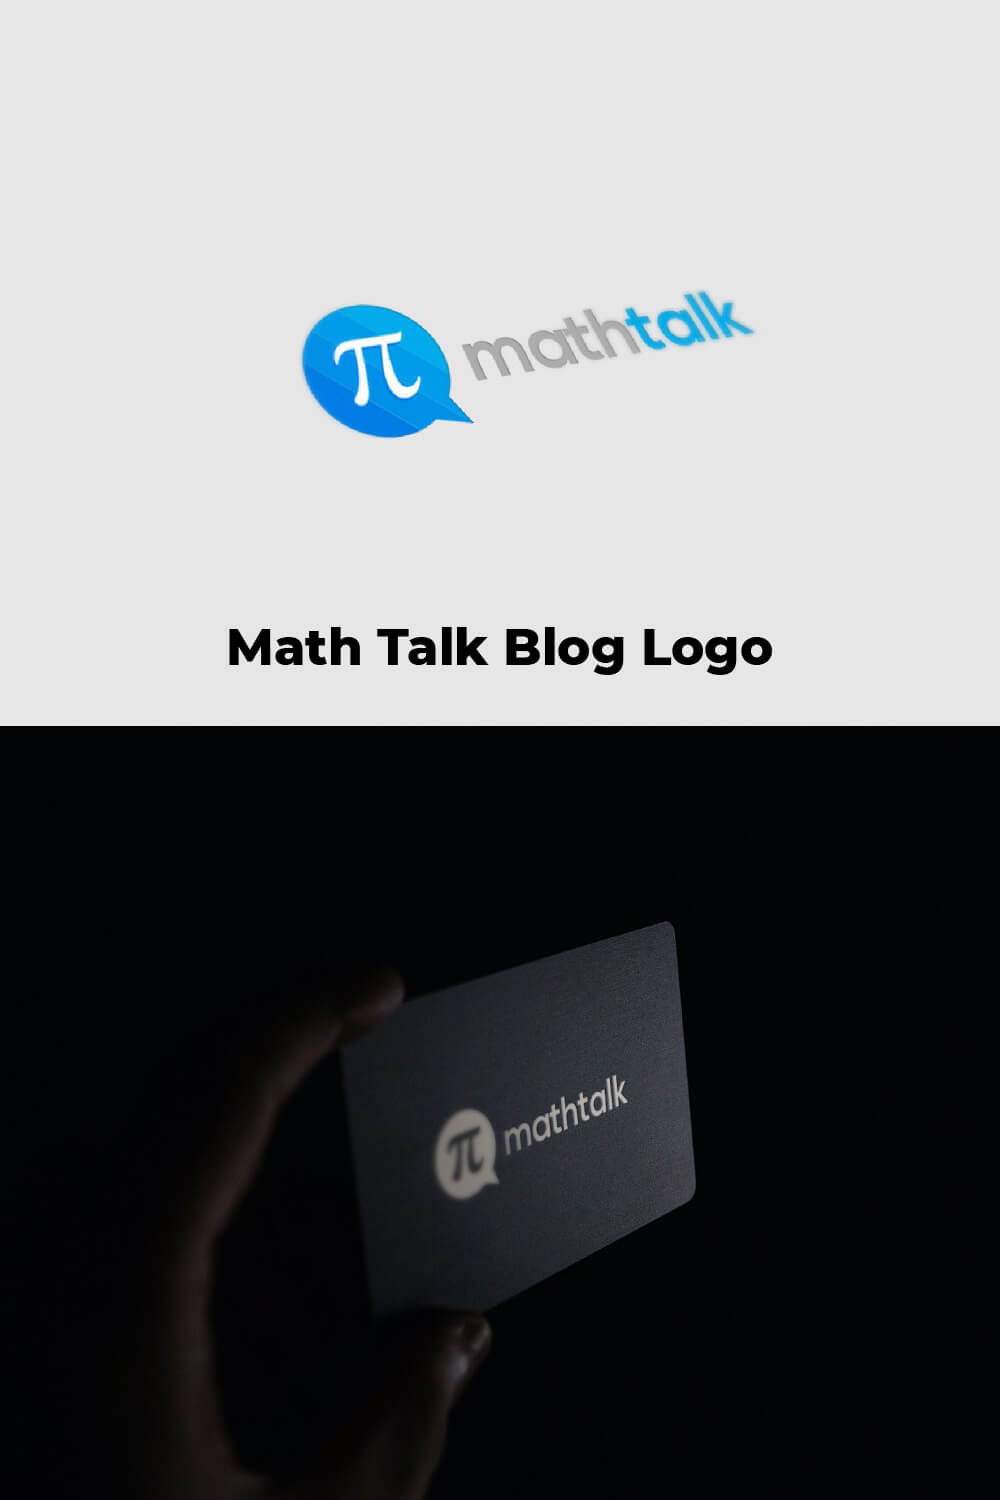 The Math Talk logo in blue and gray on a white background and a black business card in hand.